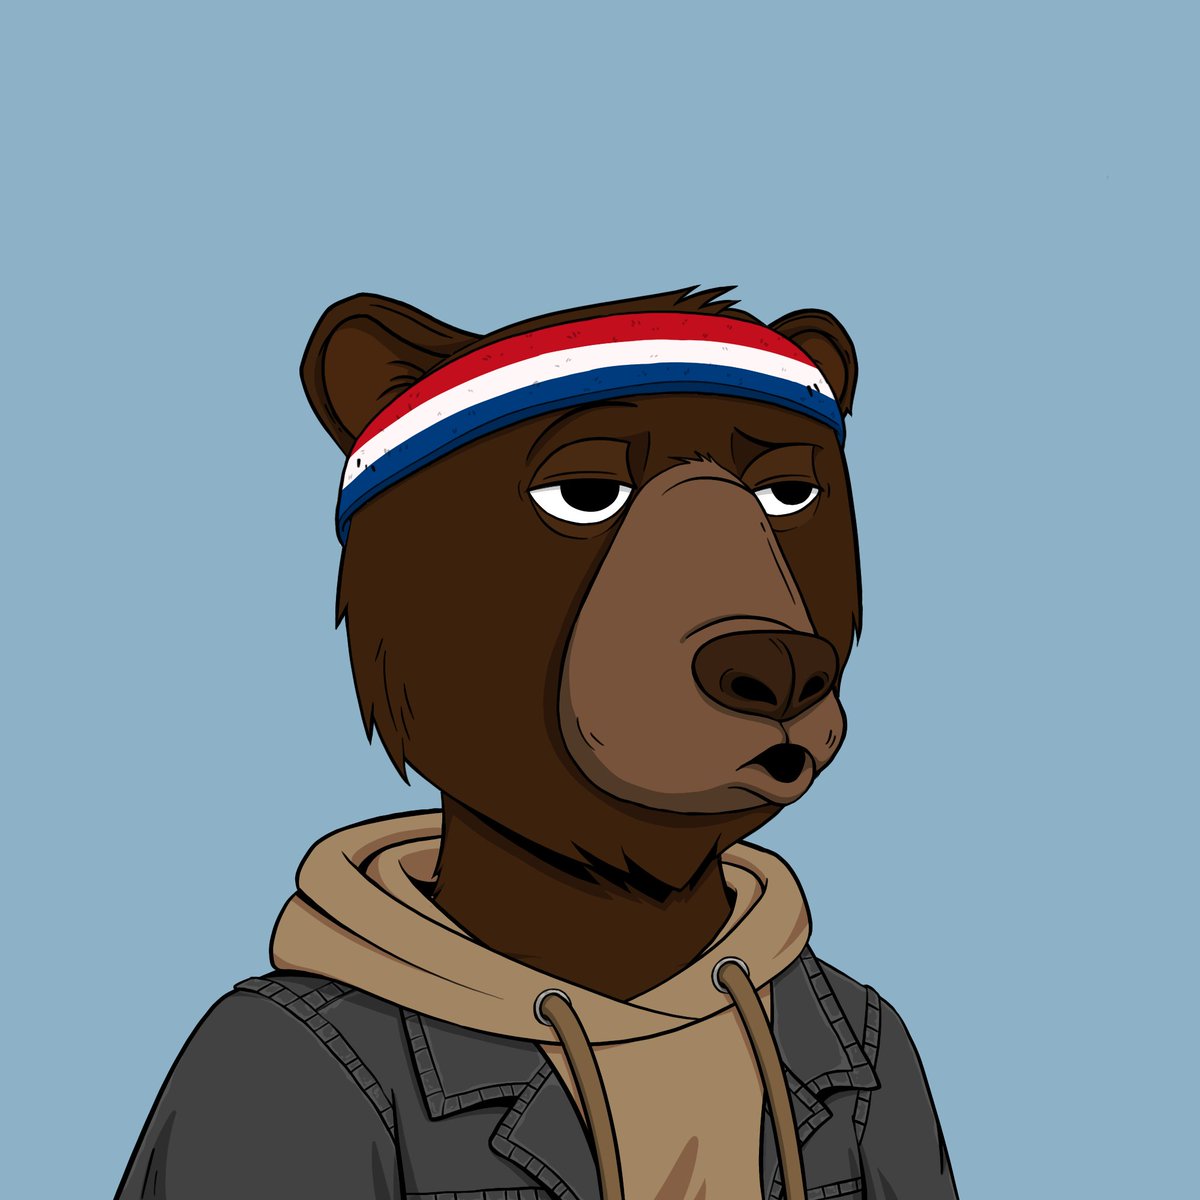 I've heard that bears follow bears 😅

I am finally a proud owner of @okaybears 👌🐻

Please welcome and say hello to my first and new bear! Tomorrow I'll officially introduce myself to the @okaybears community

#WAGBO